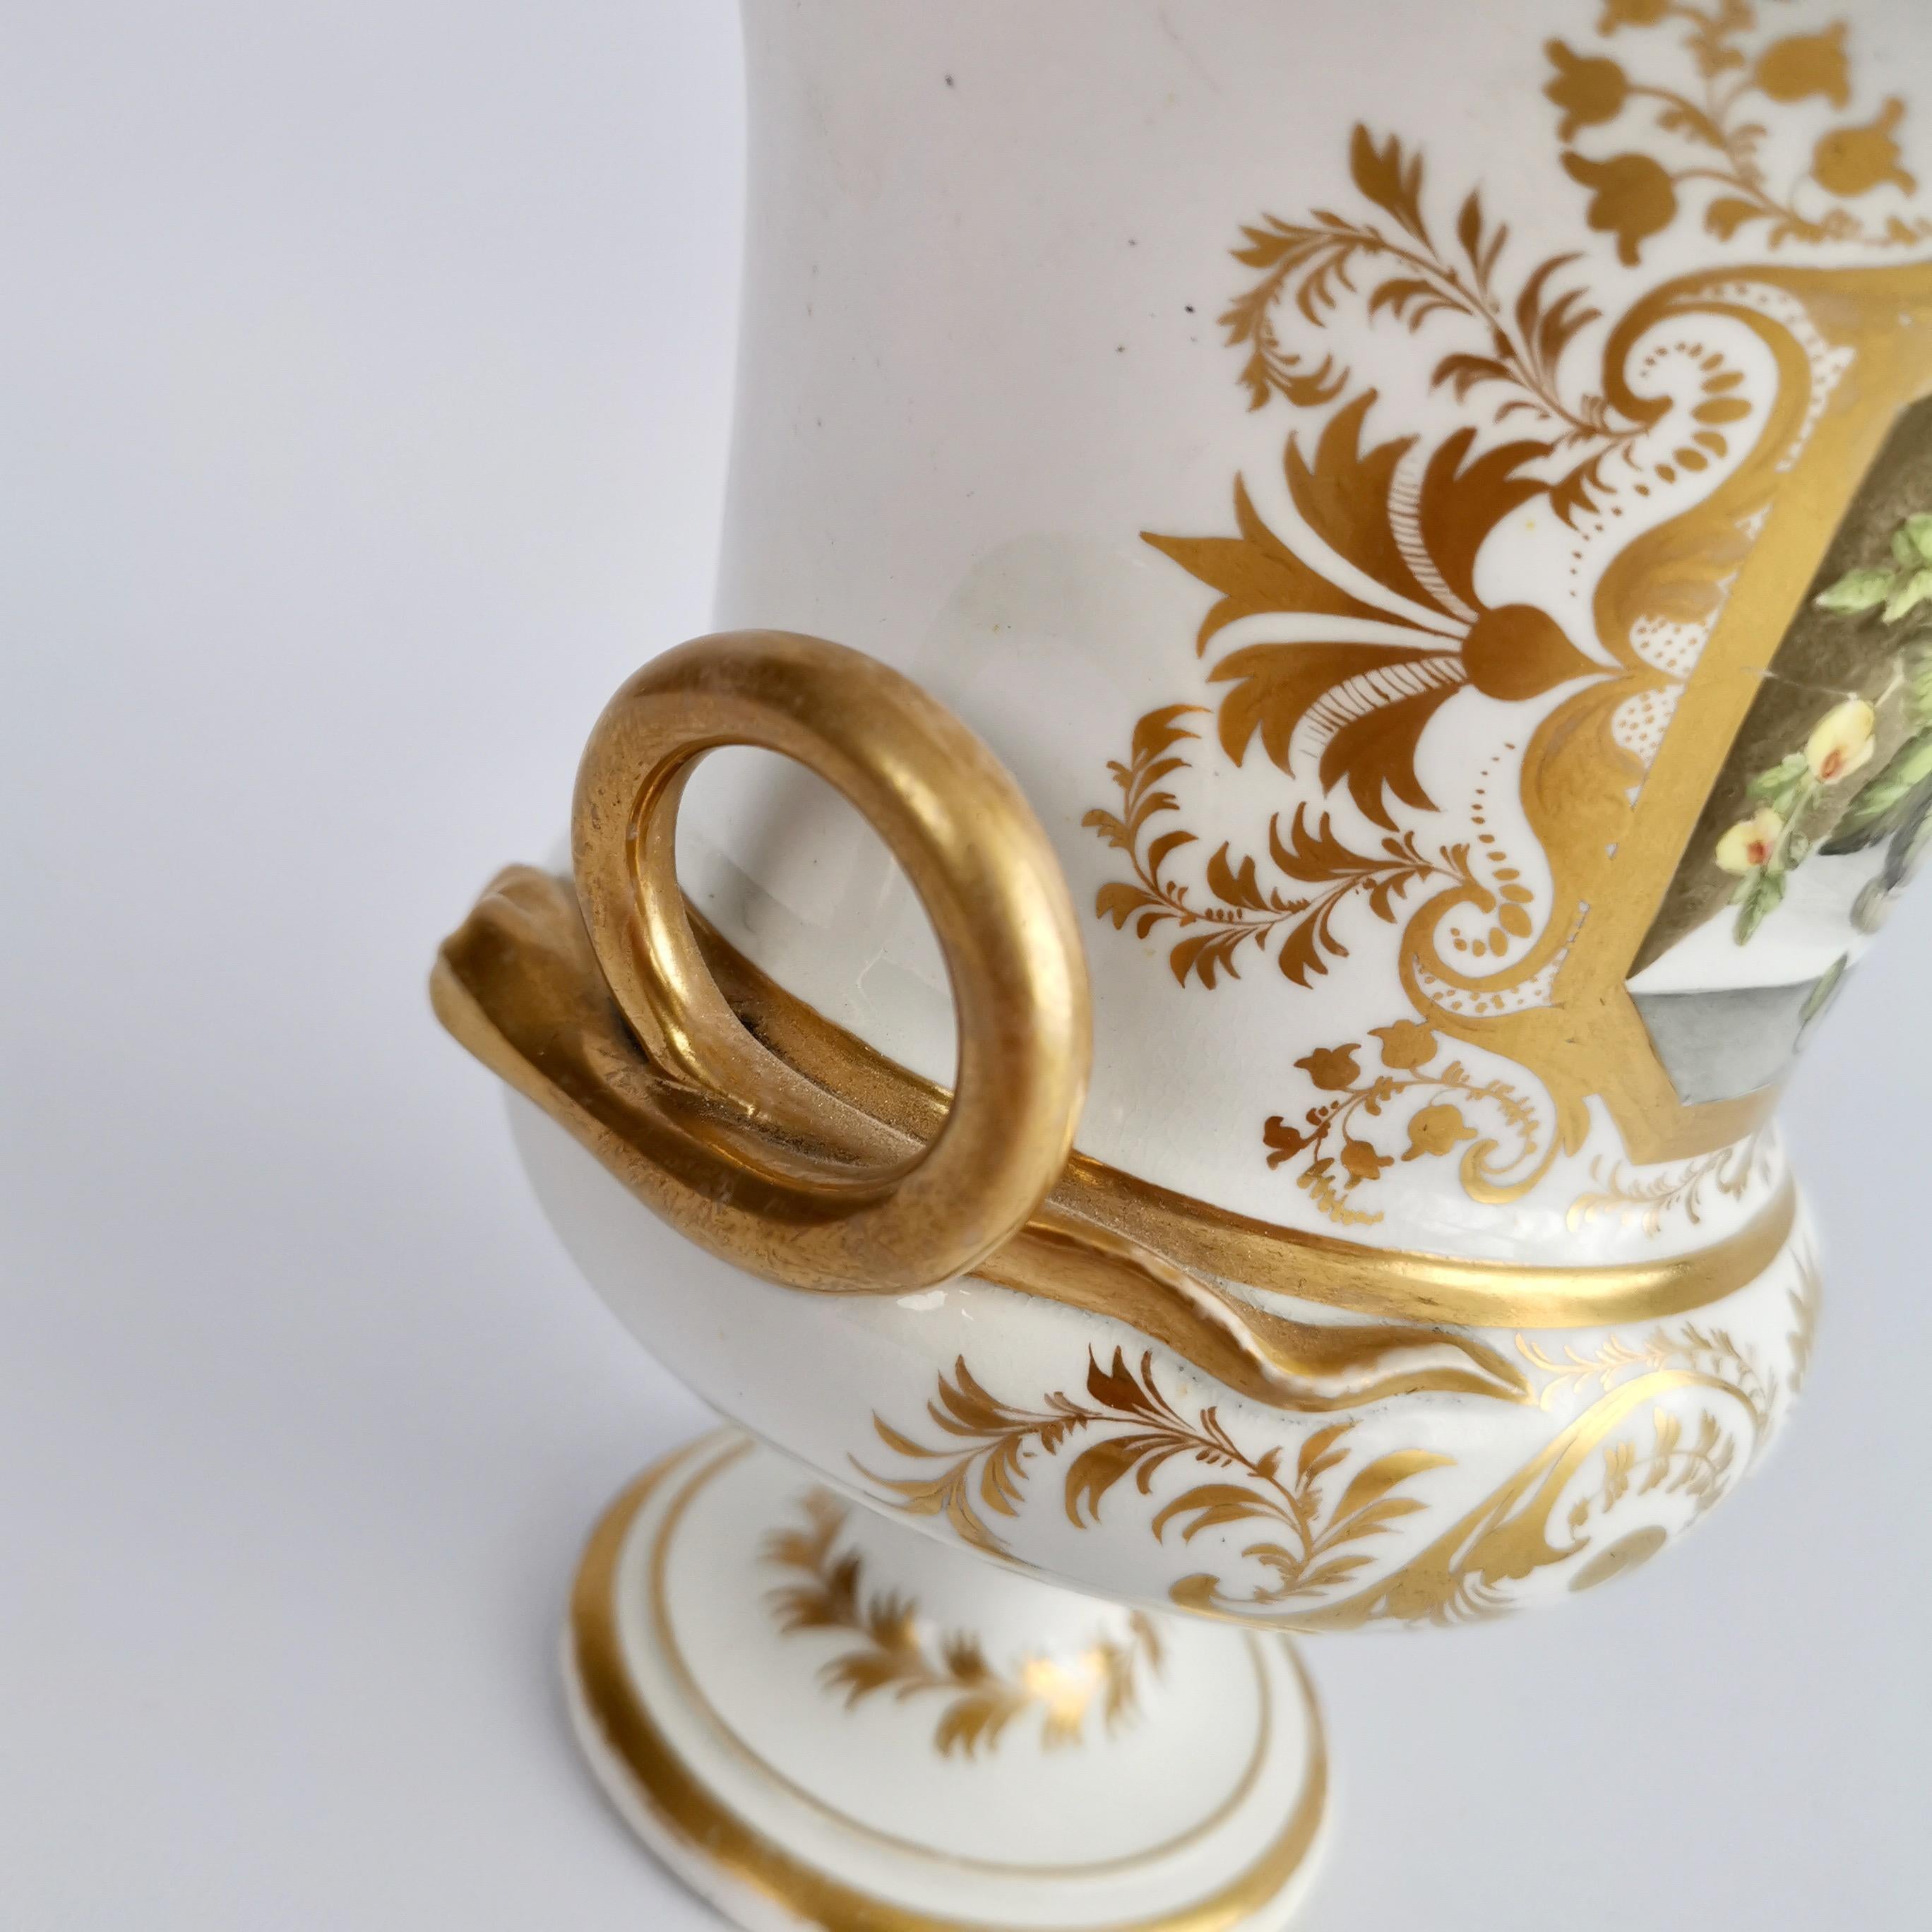 Early 19th Century Bloor Derby Porcelain Campana Vase, White with Gilt and Flowers, Regency ca 1815